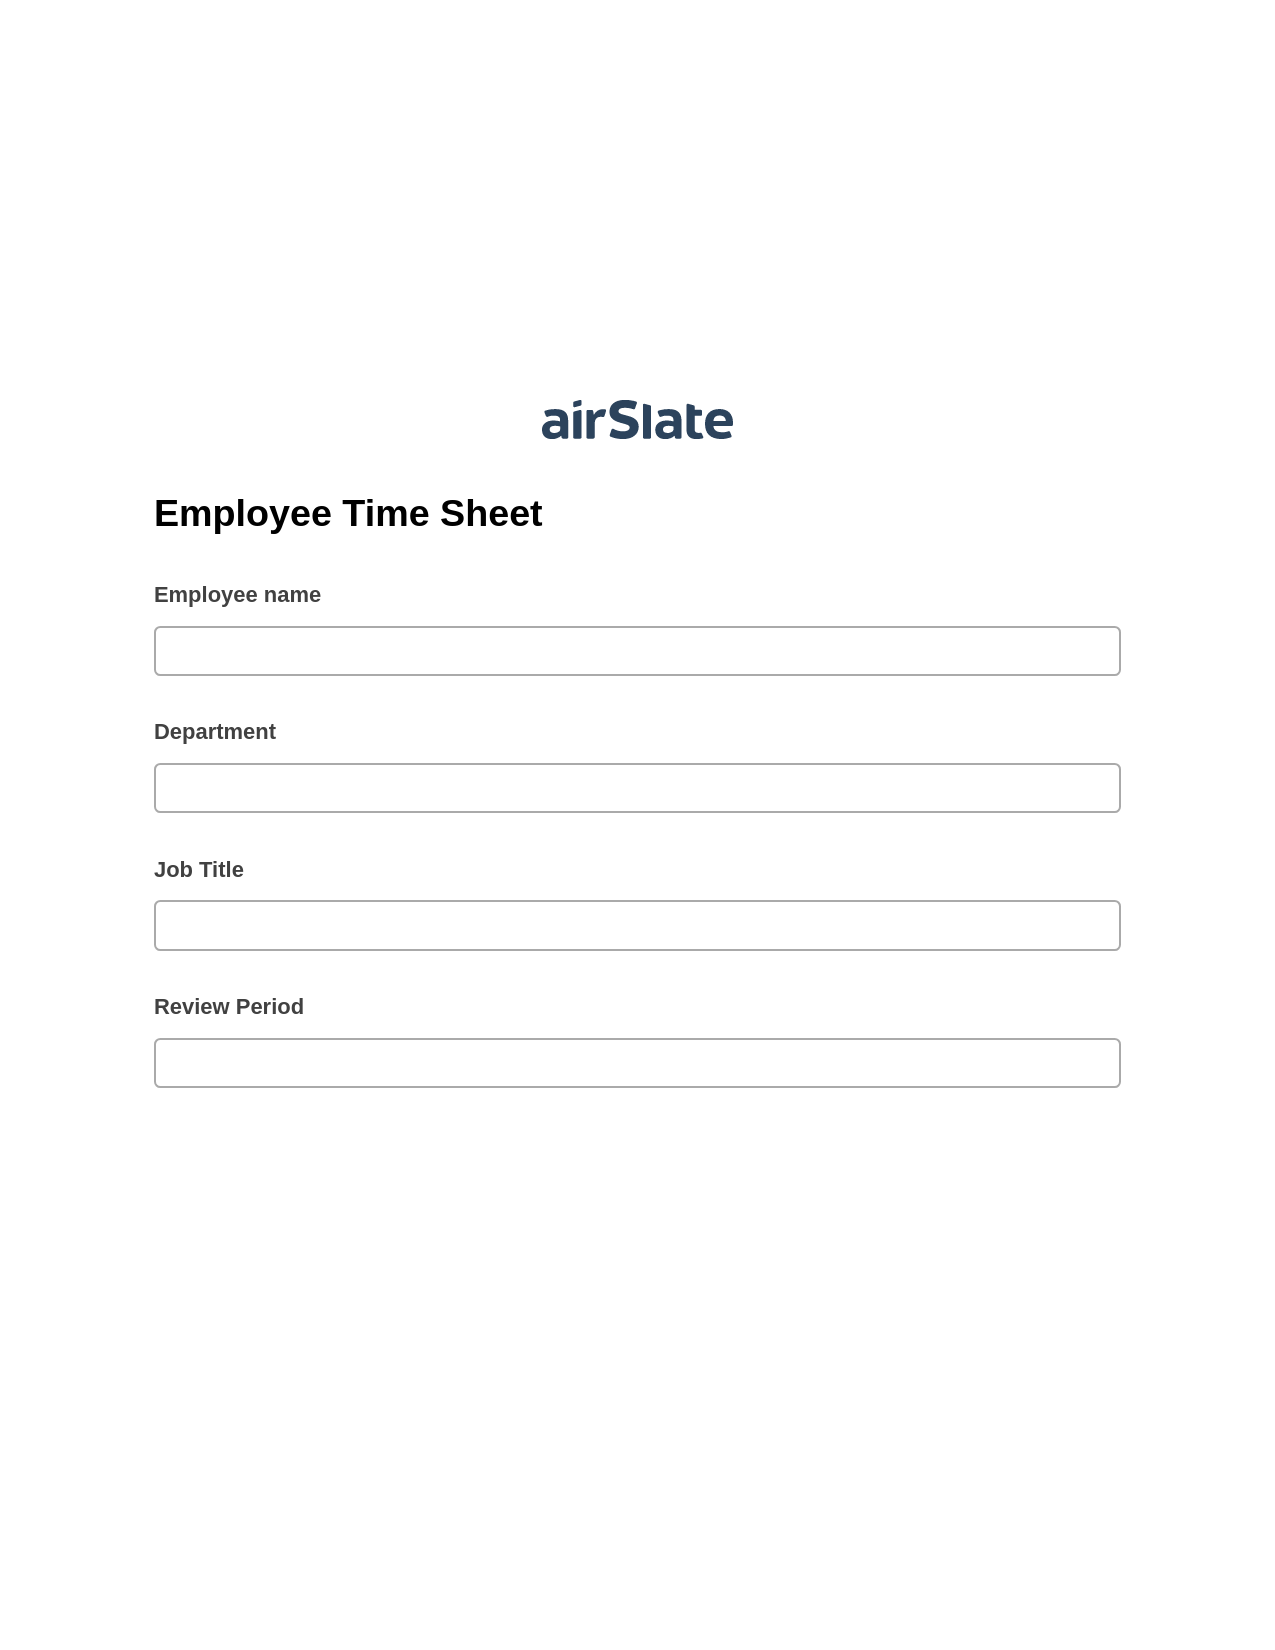 Employee Time Sheet Prefill from NetSuite records, Remove Tags From Slate Bot, Archive to Dropbox Bot